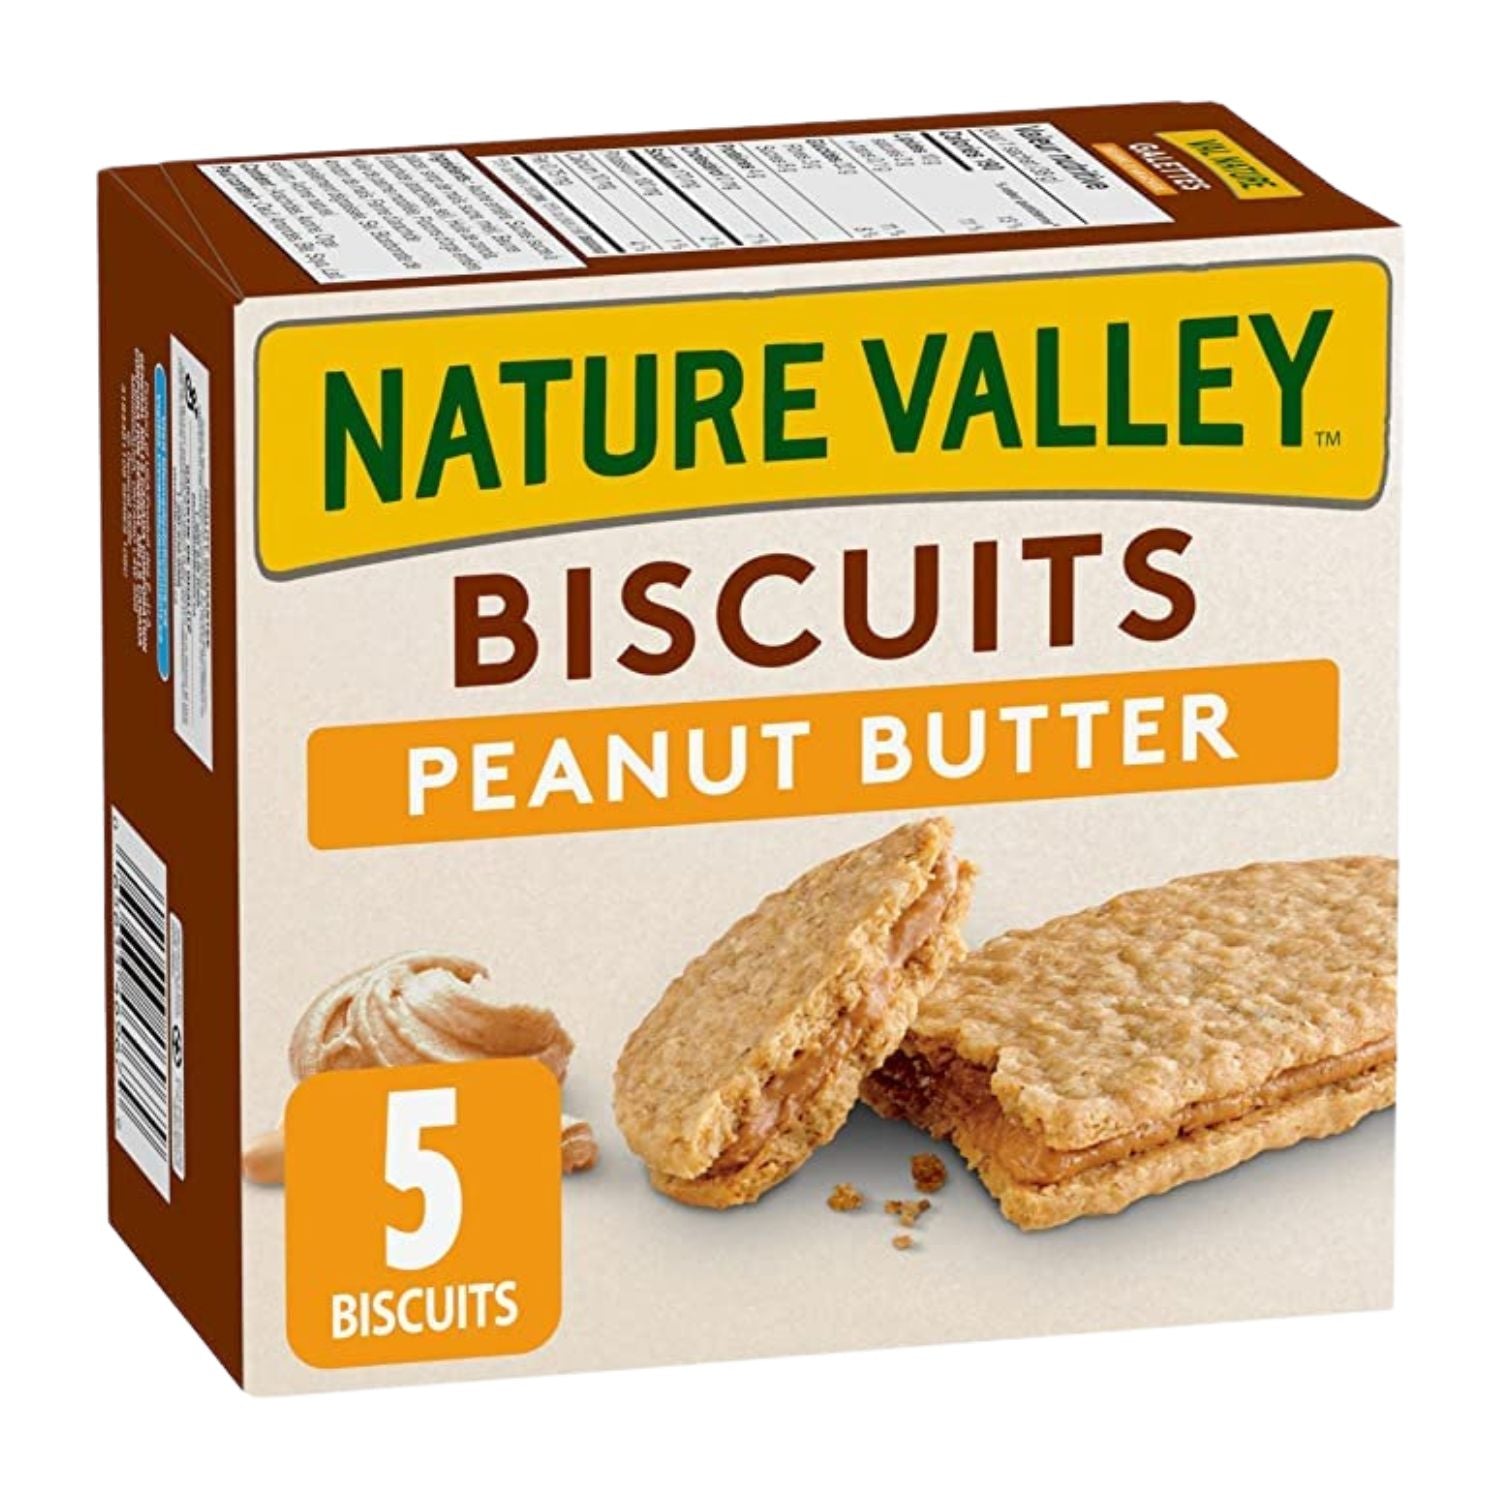 Nature Valley Peanut Butter Biscuits 5 Count, 190g/6.7oz (Shipped from Canada)